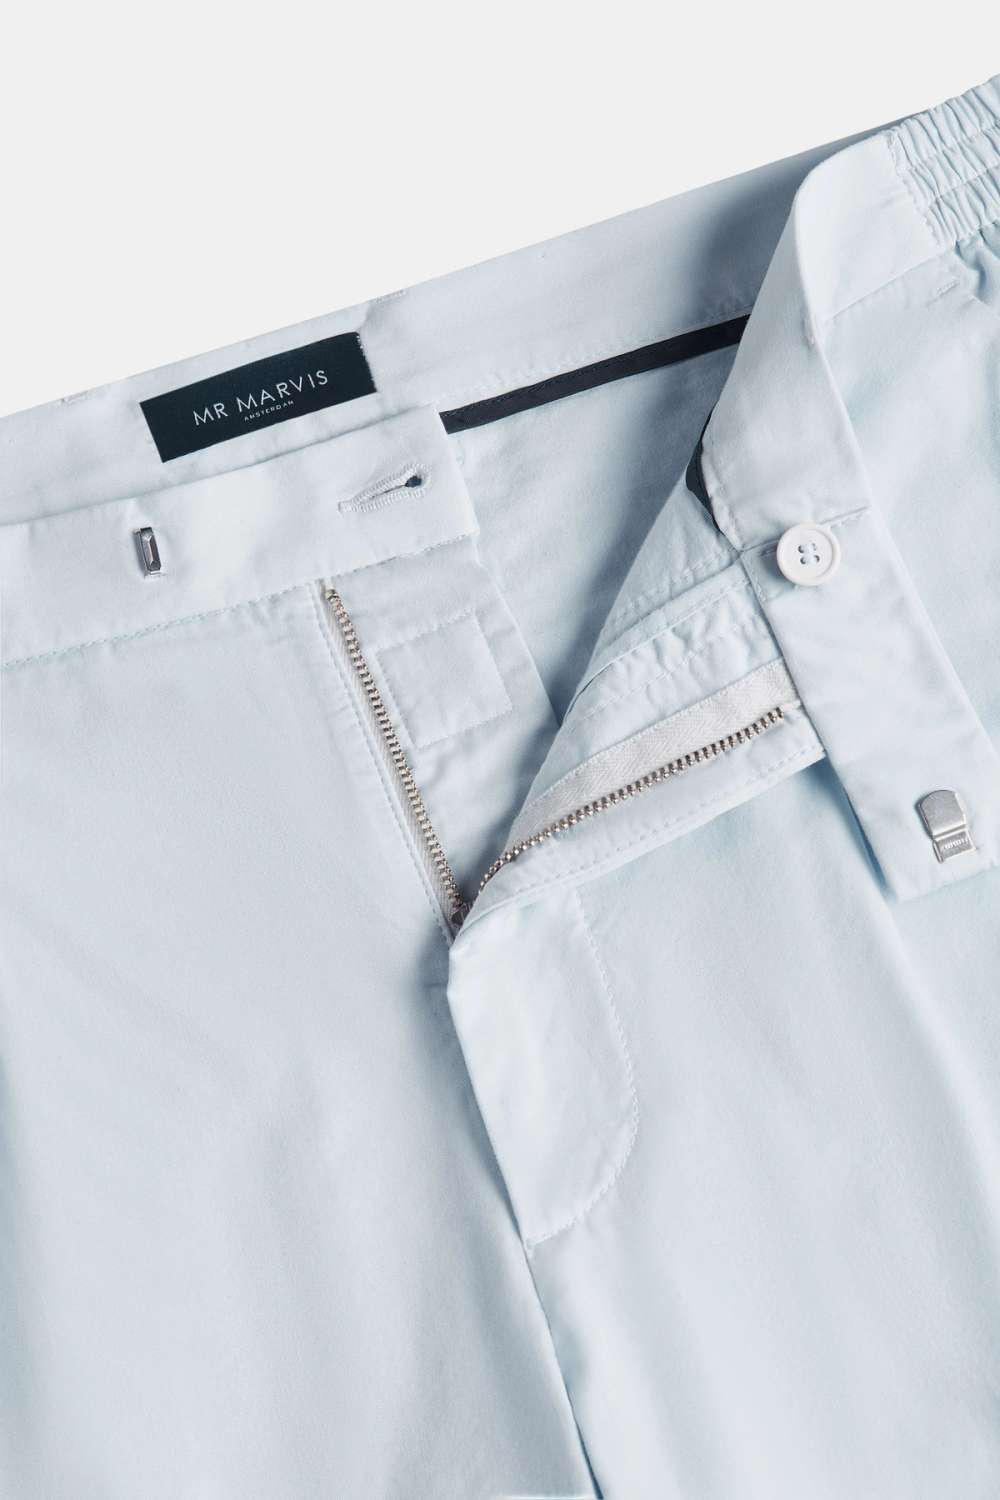 Avenues * The Classic Chinos